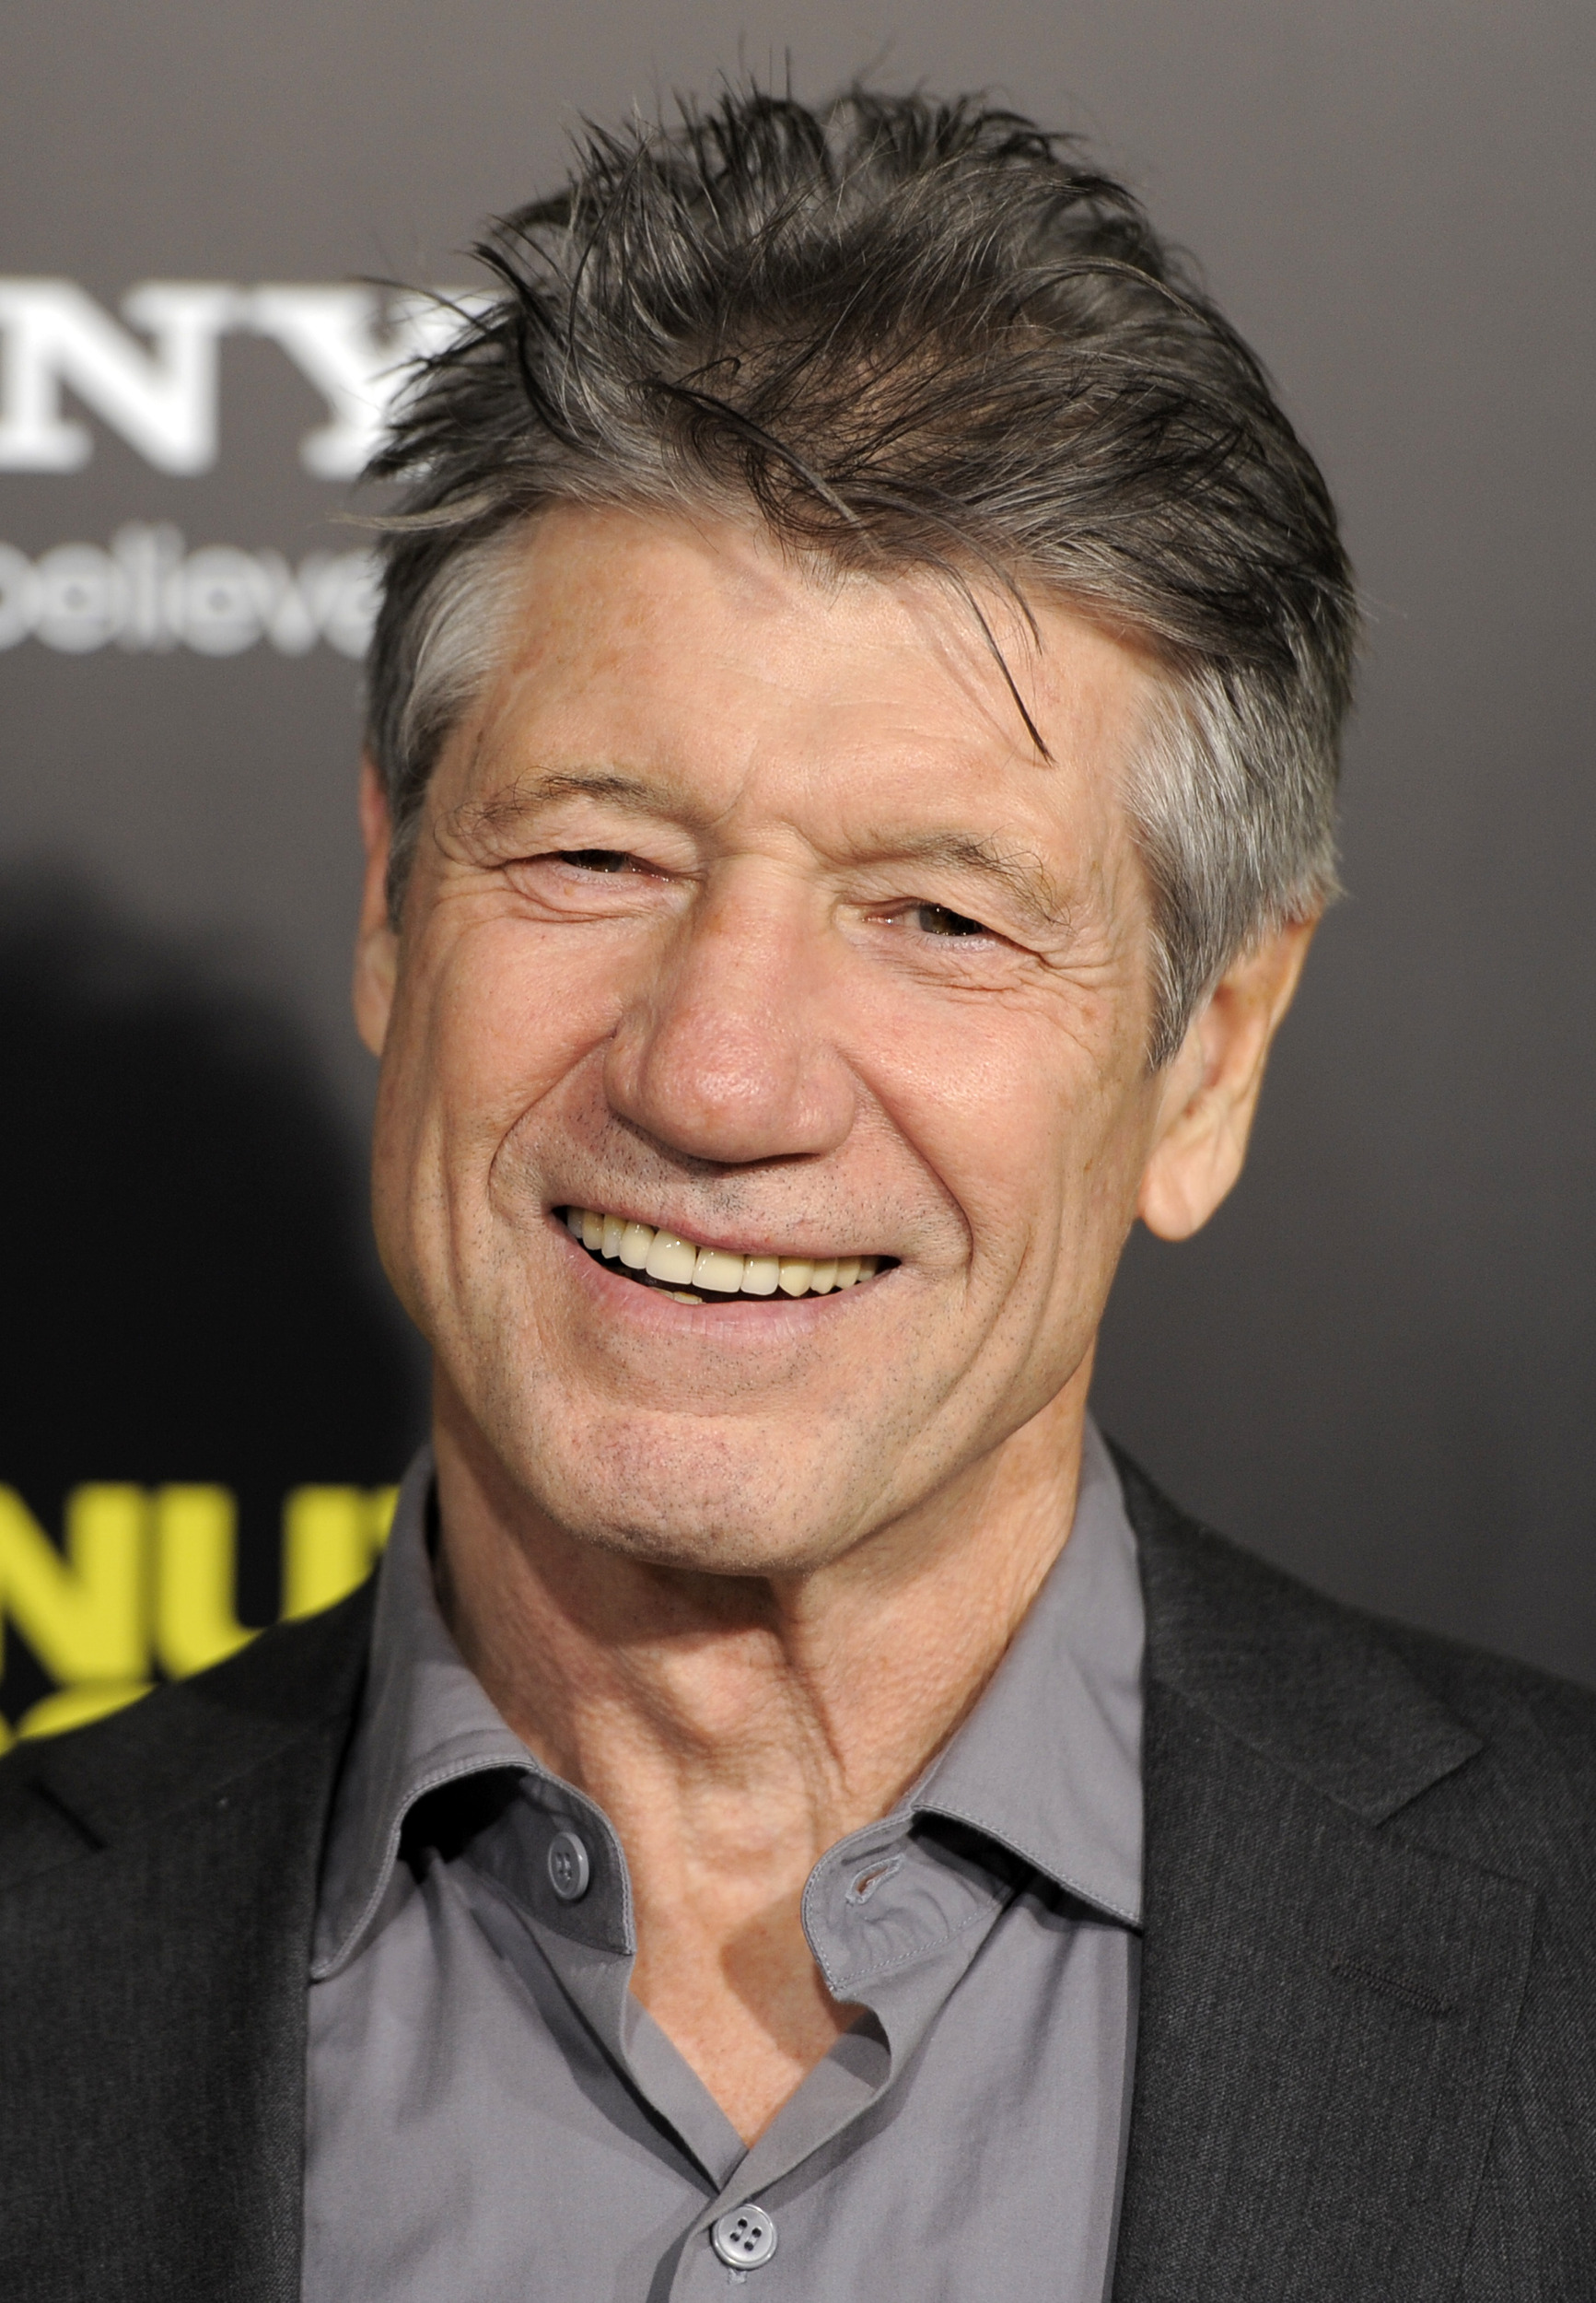 Pictures of Fred Ward - Pictures Of Celebrities.